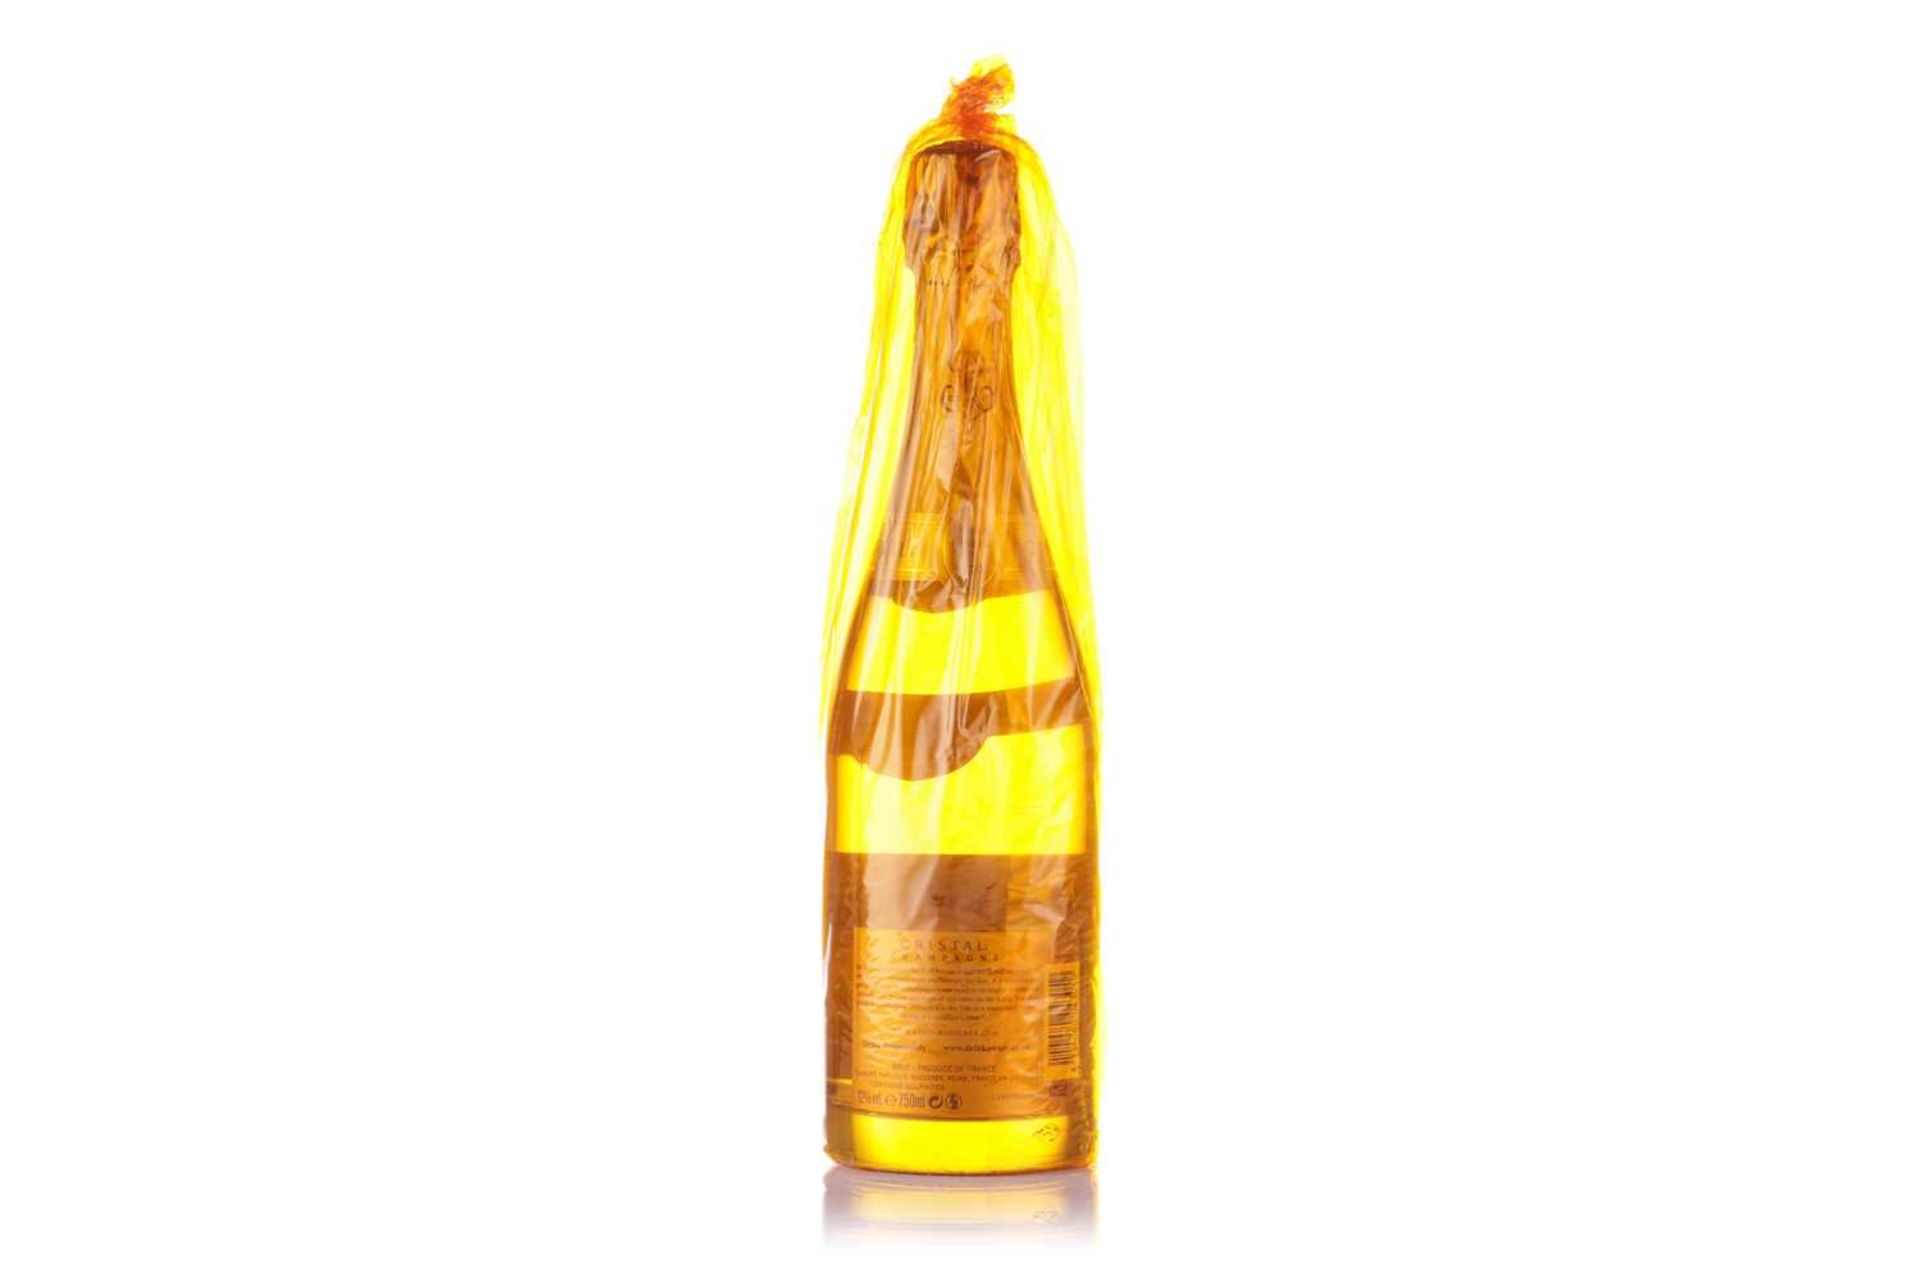 A bottle of Louis Roederer Cristal Champagne 2012, 750ml, 12%Private Collector in Bucks - Image 2 of 2